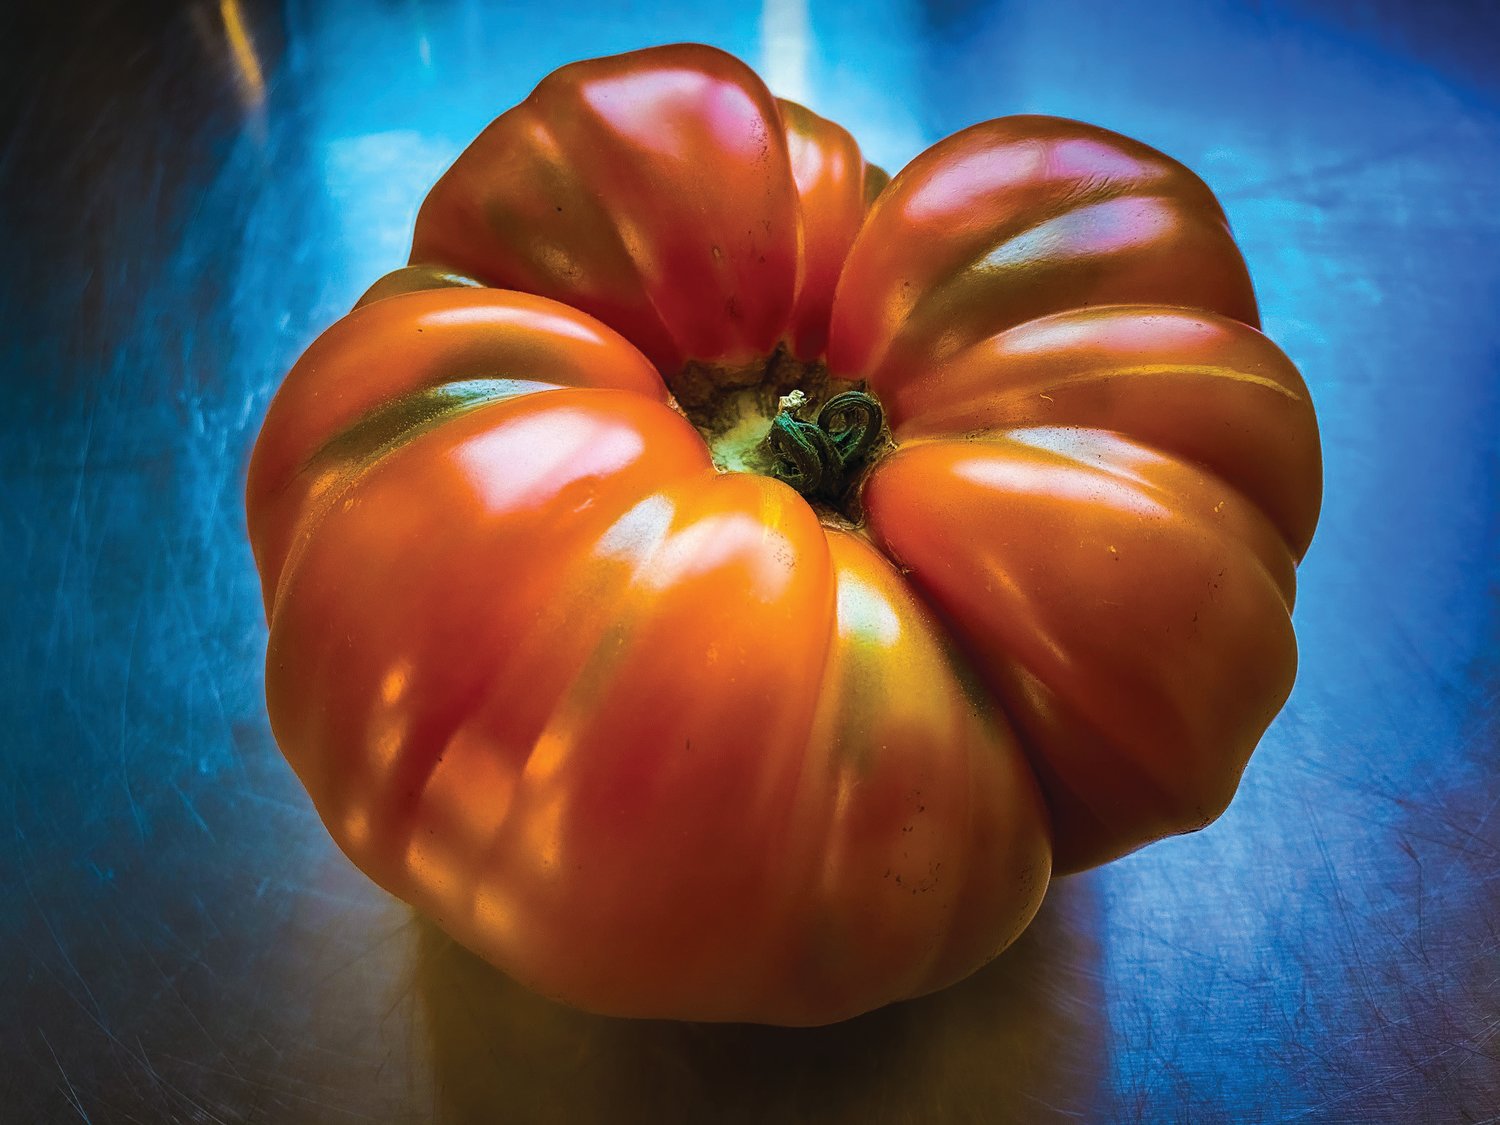 It’s that time of the year to bring fresh tomatoes from the garden into your home cooking.